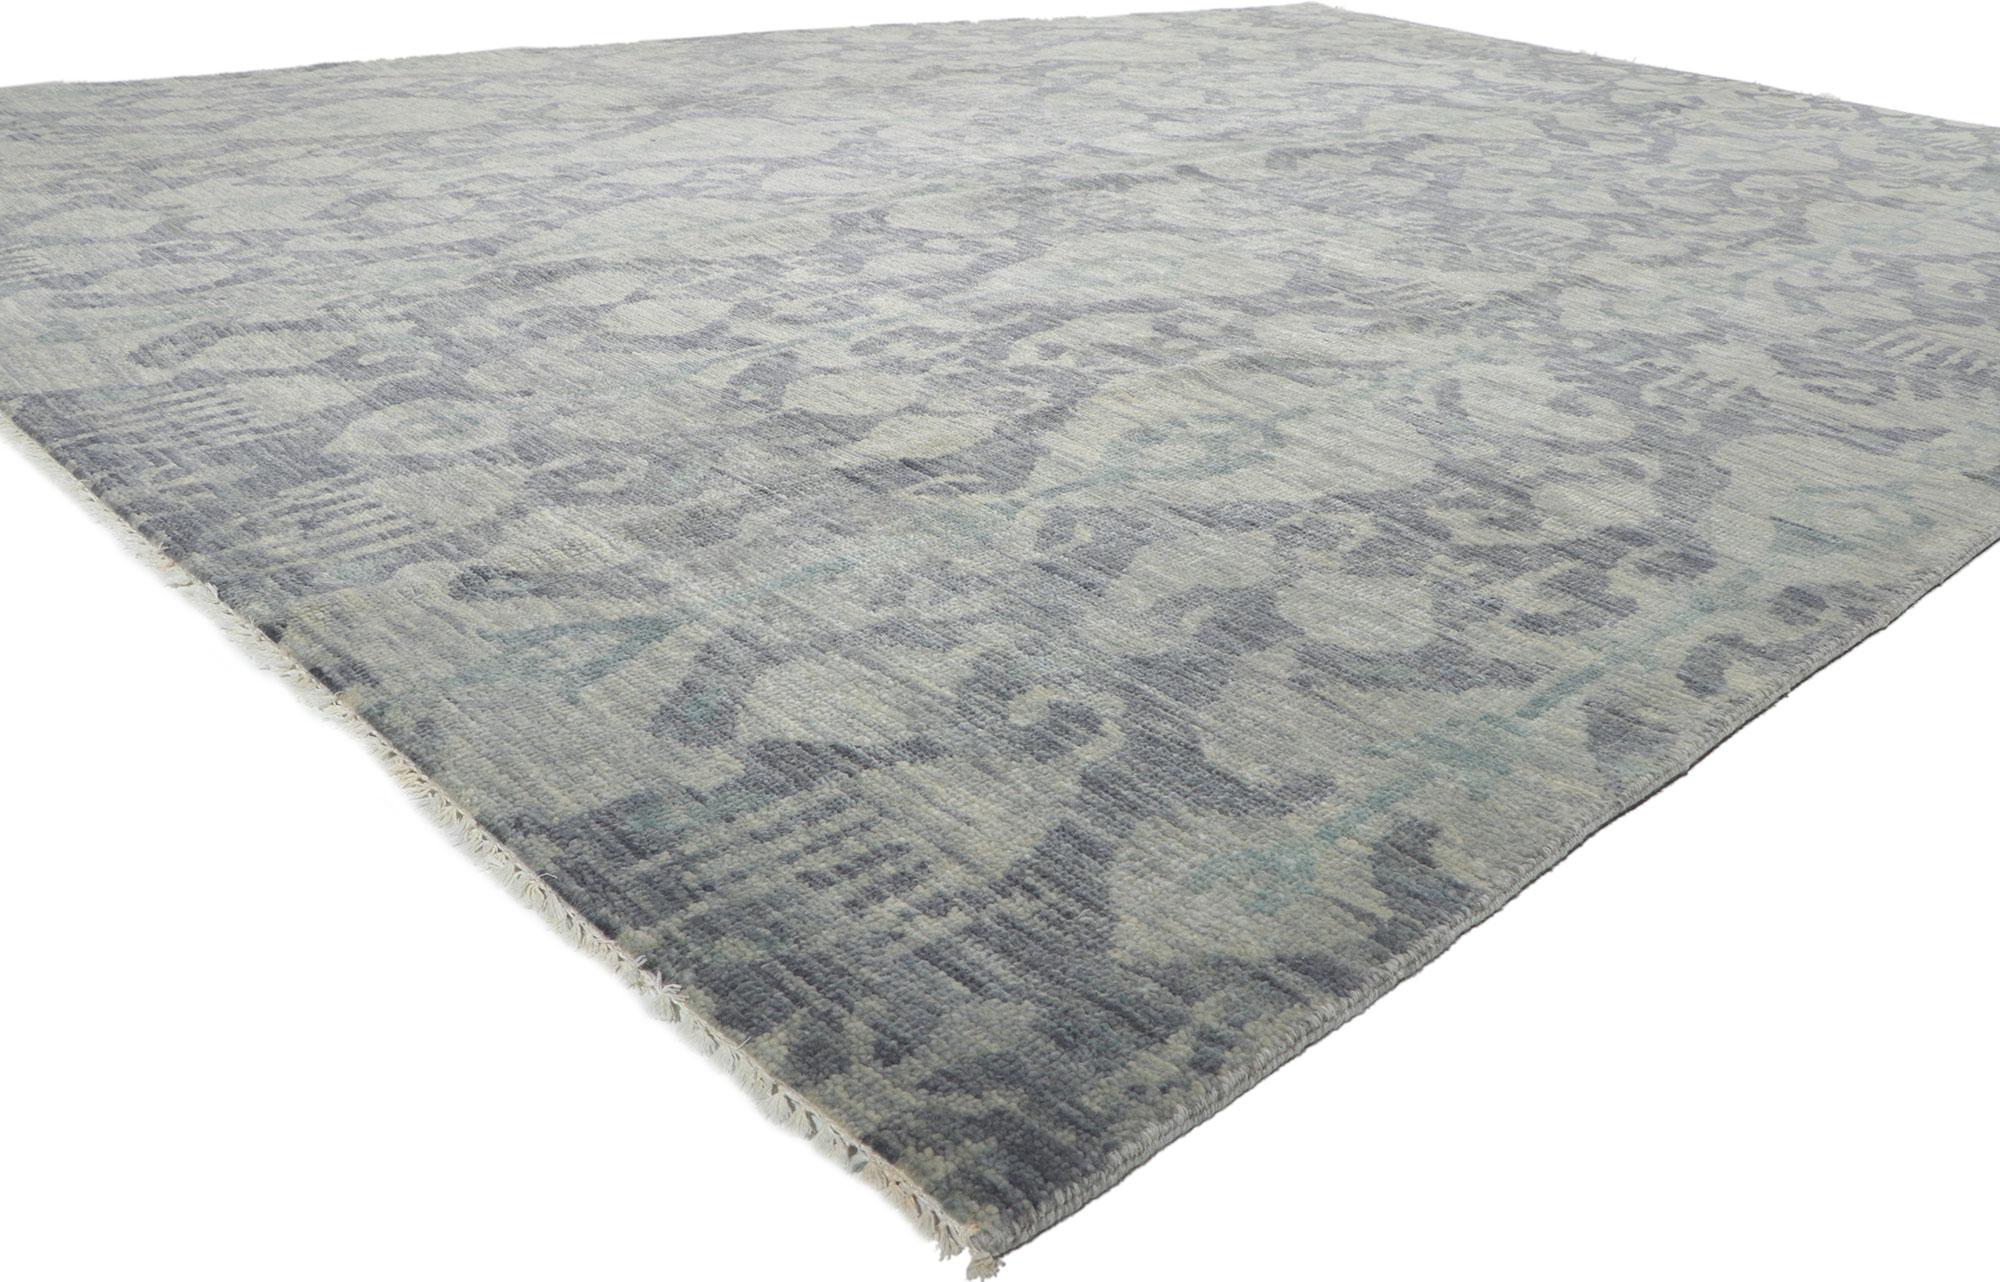 30263 New Transitional Ikat Rug, 09'11 X 14'00. Emanating transitional style with incredible detail and texture, this hand knotted wool Ikat rug from India is a captivating vision of woven beauty. The eye-catching ikat design and colorway woven into